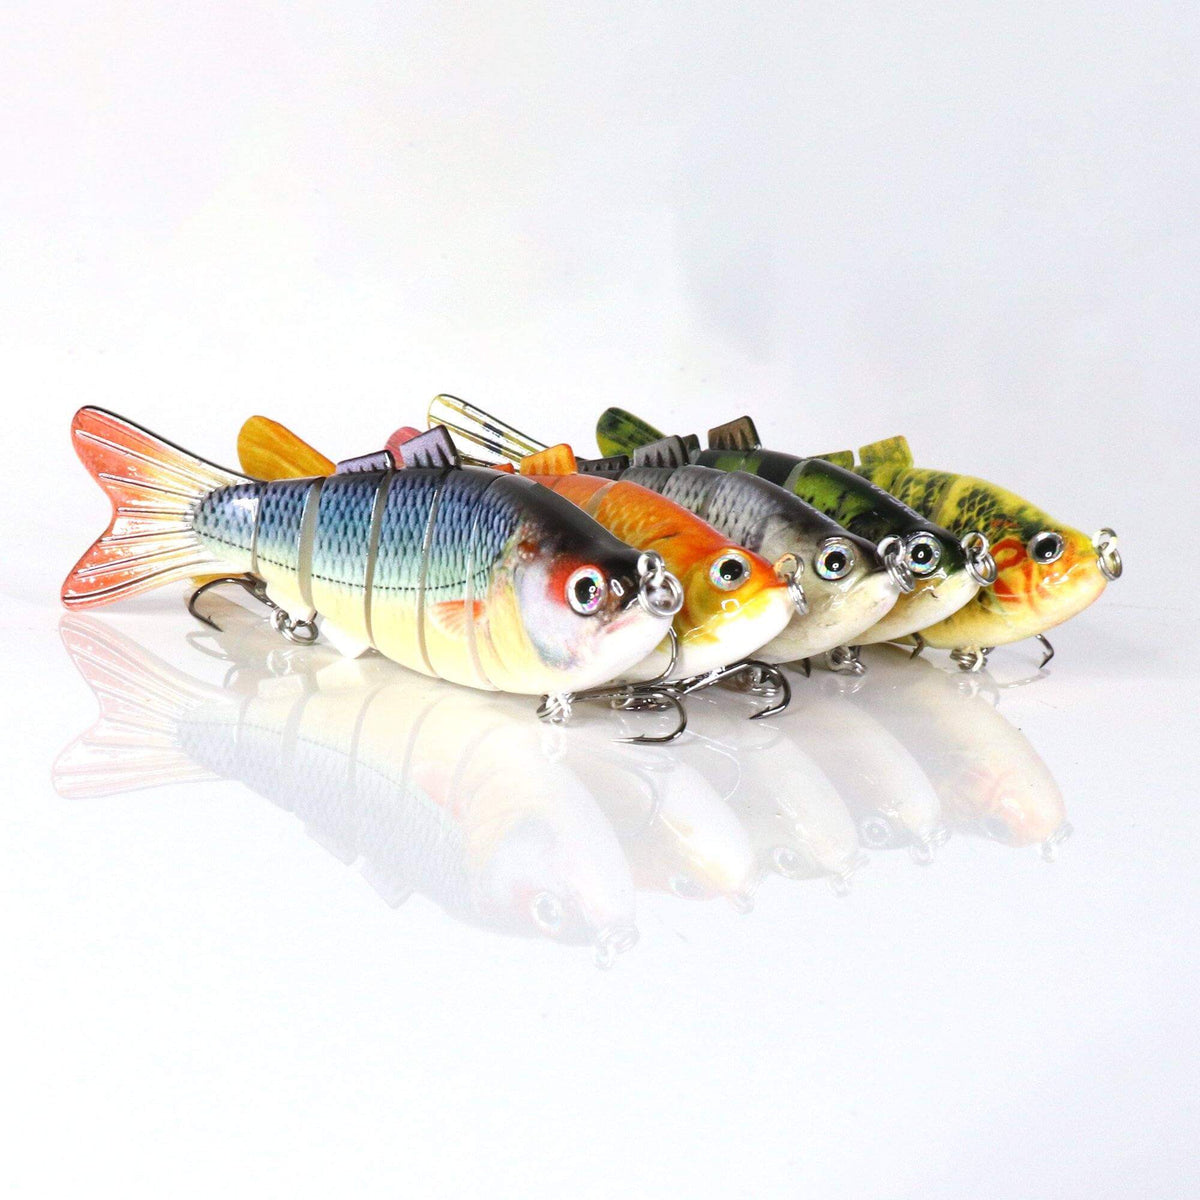 Shop All Fishing Lures - Fishing Gear Online